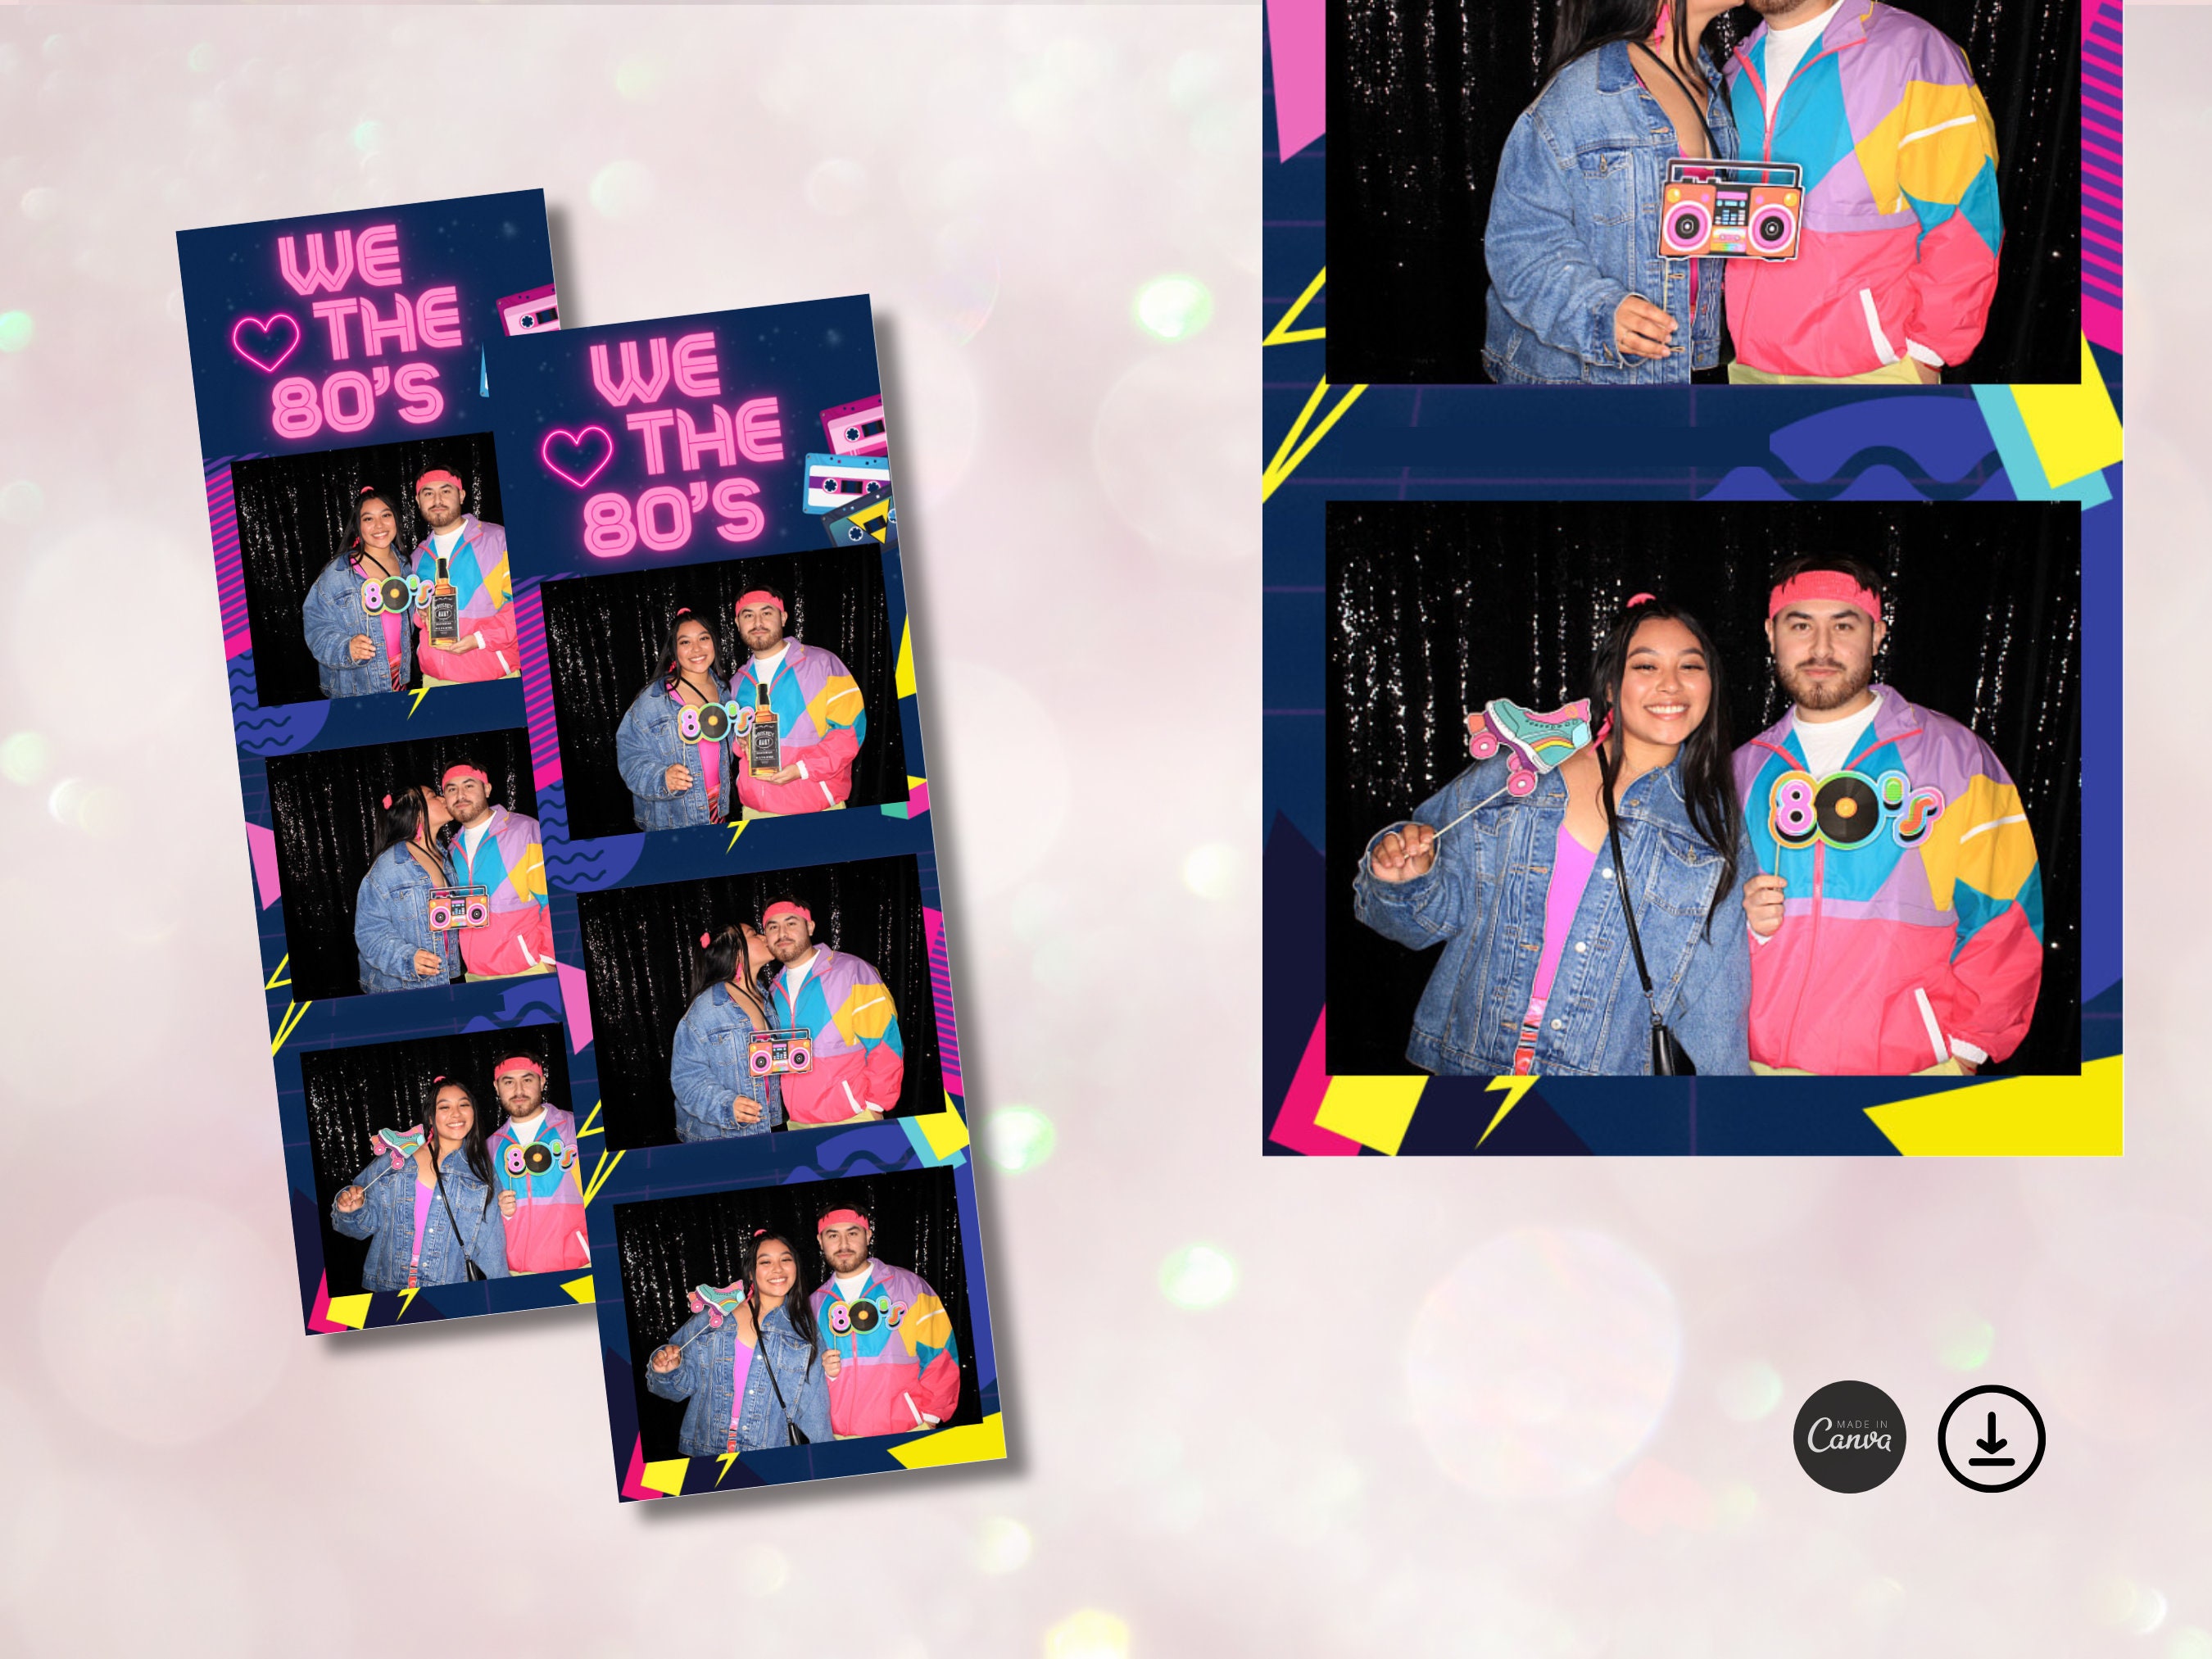 I Love 80s Photo Booth Frame Photobooth Props Not Pre-Cut for Easy Mounting  by Self 23x17inch